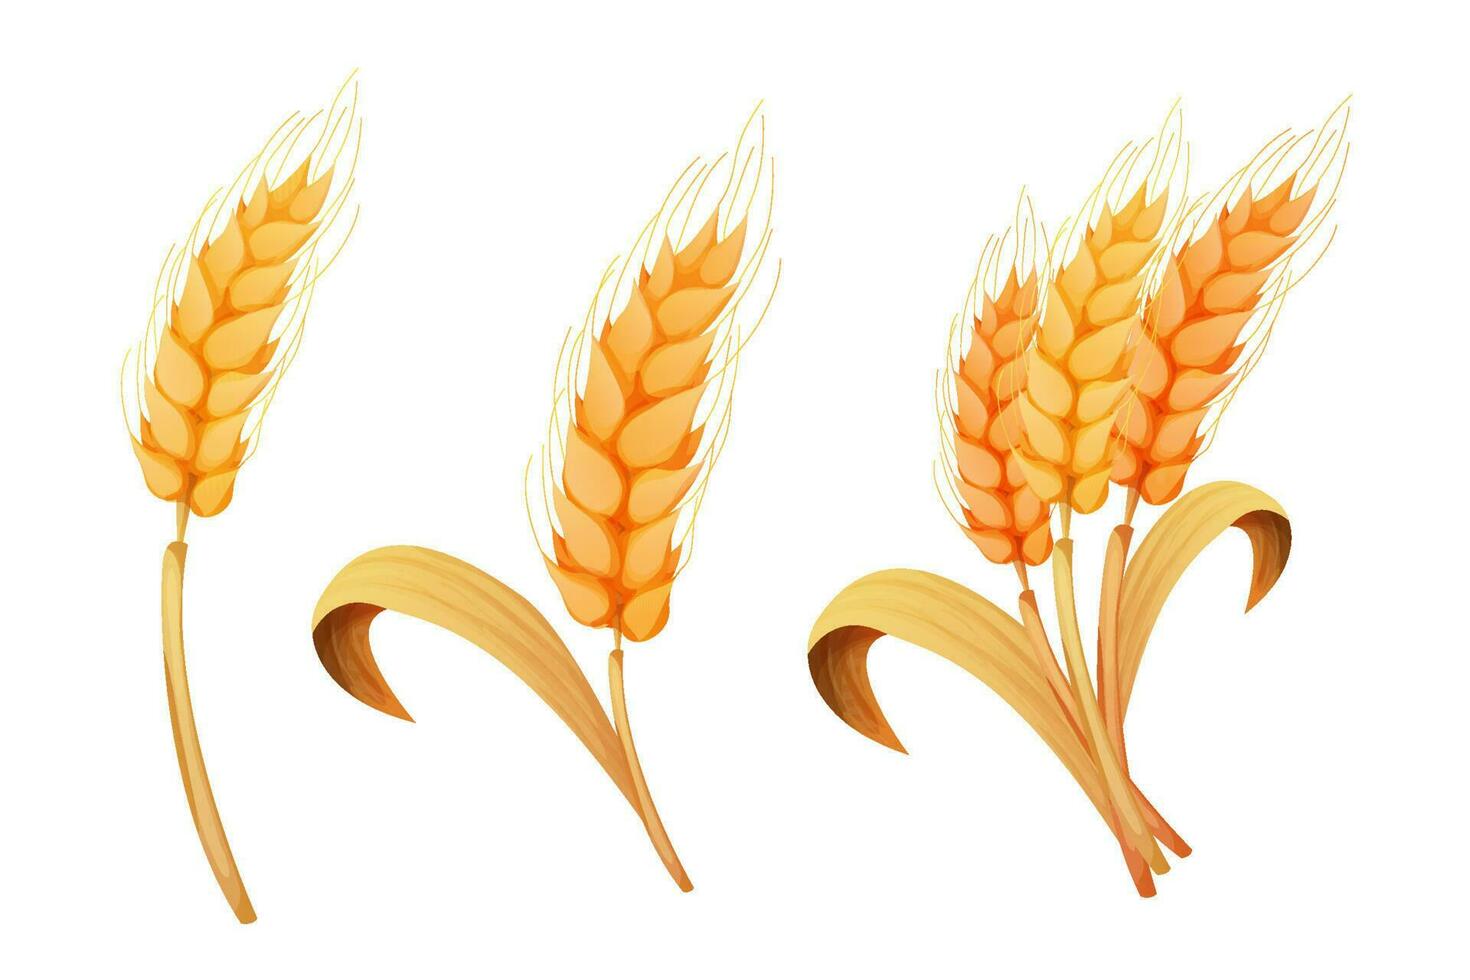 Wheat spikelet, grain on straw in cartoon style, detailed isolated on white background. Agriculture plant with seeds. Vector illustration